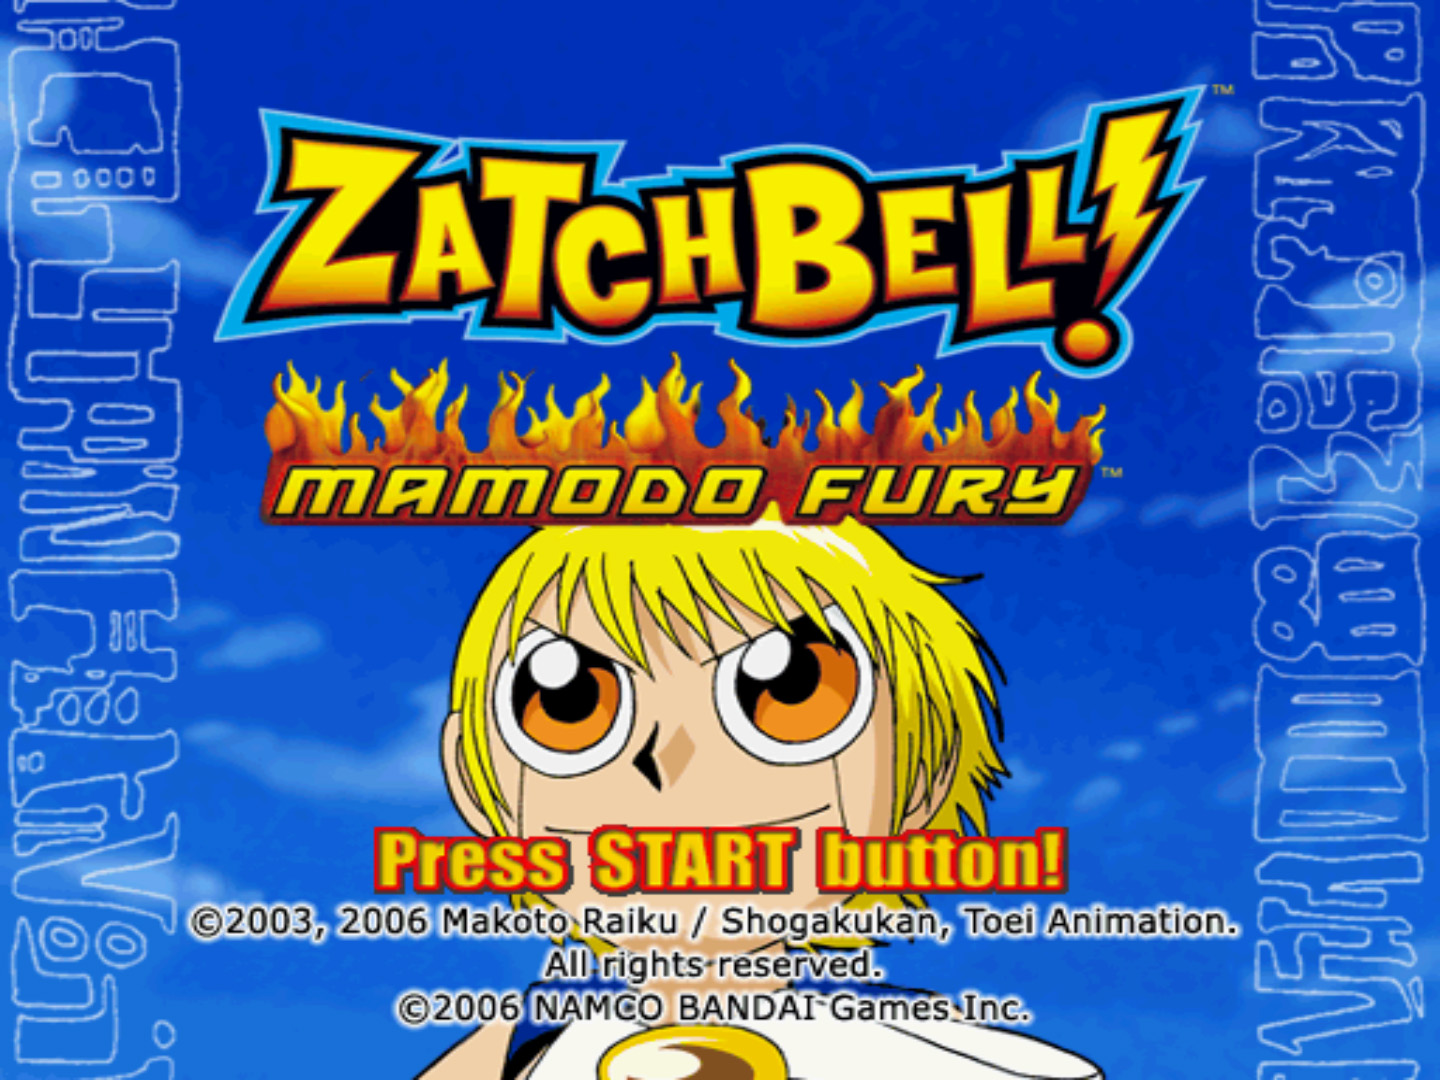 Download Zatch Bell Mamodo Fury For Android